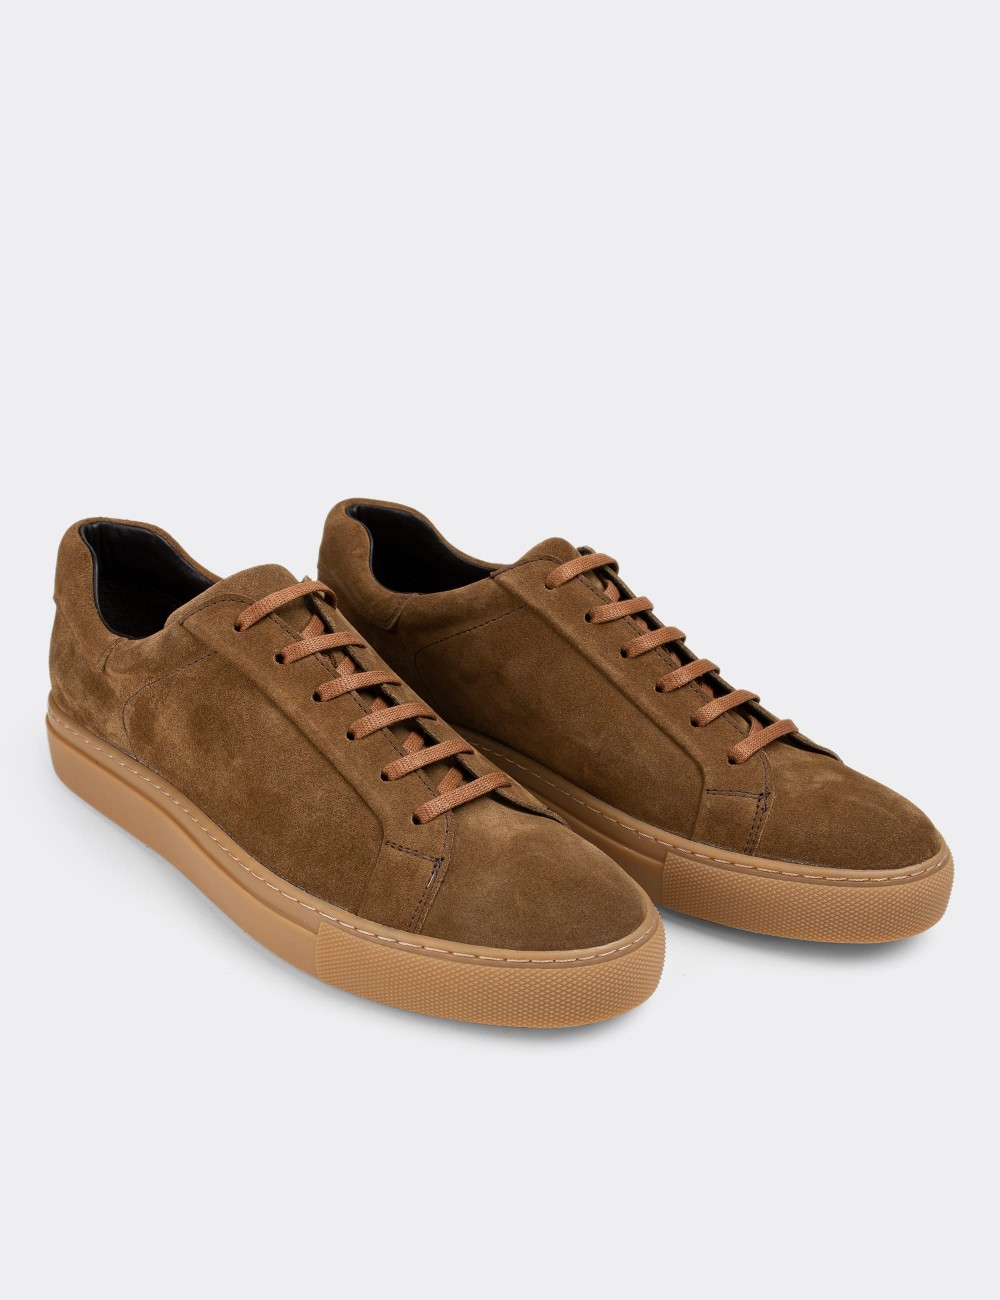 Tan Suede Leather Sneakers - 01829MTBAC01